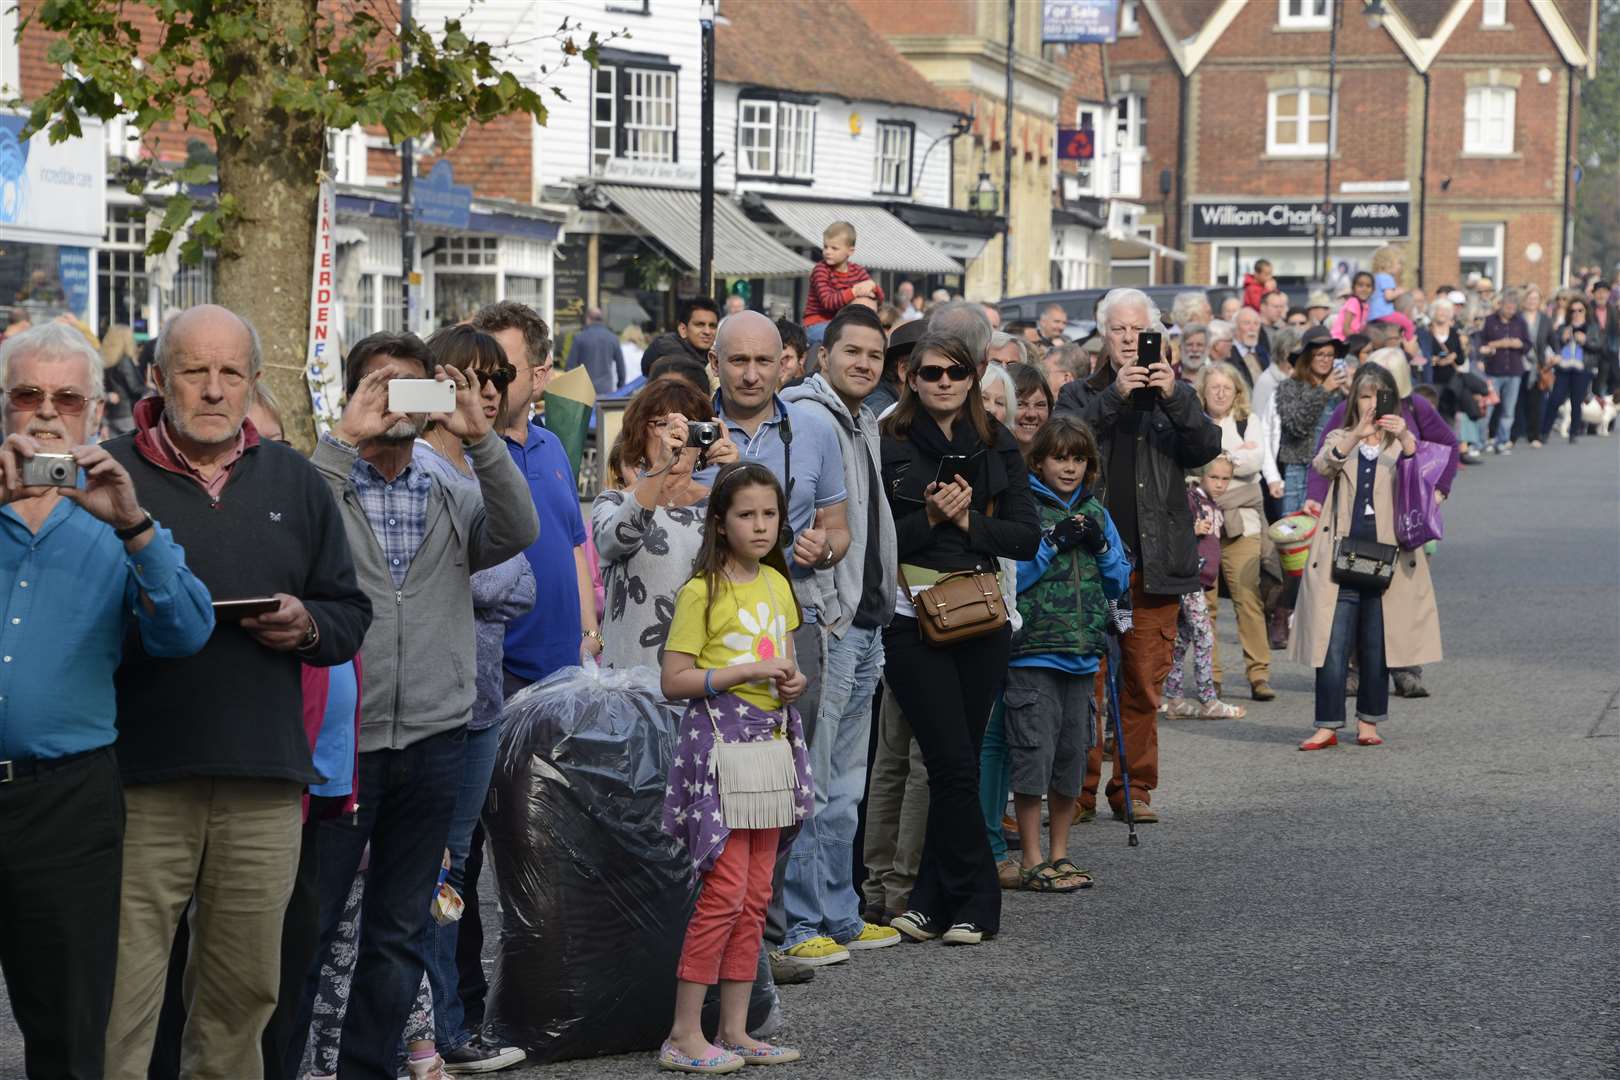 Crowds lined the High Street for the folk festival parade